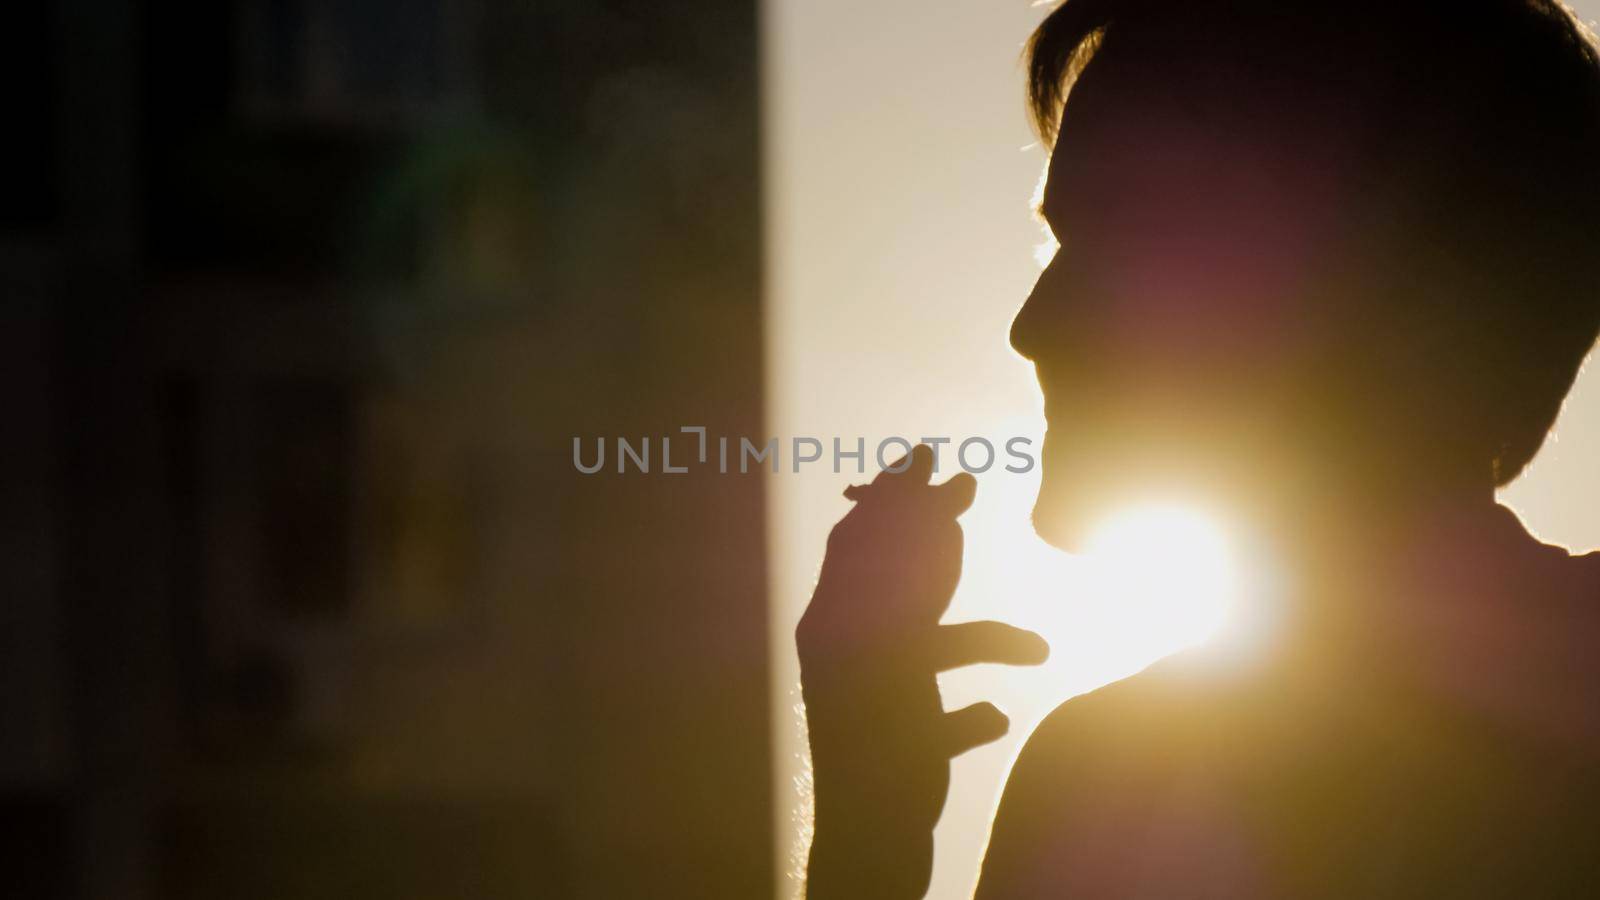 Portrait of a lonely man smoking a cigarette, silhouette